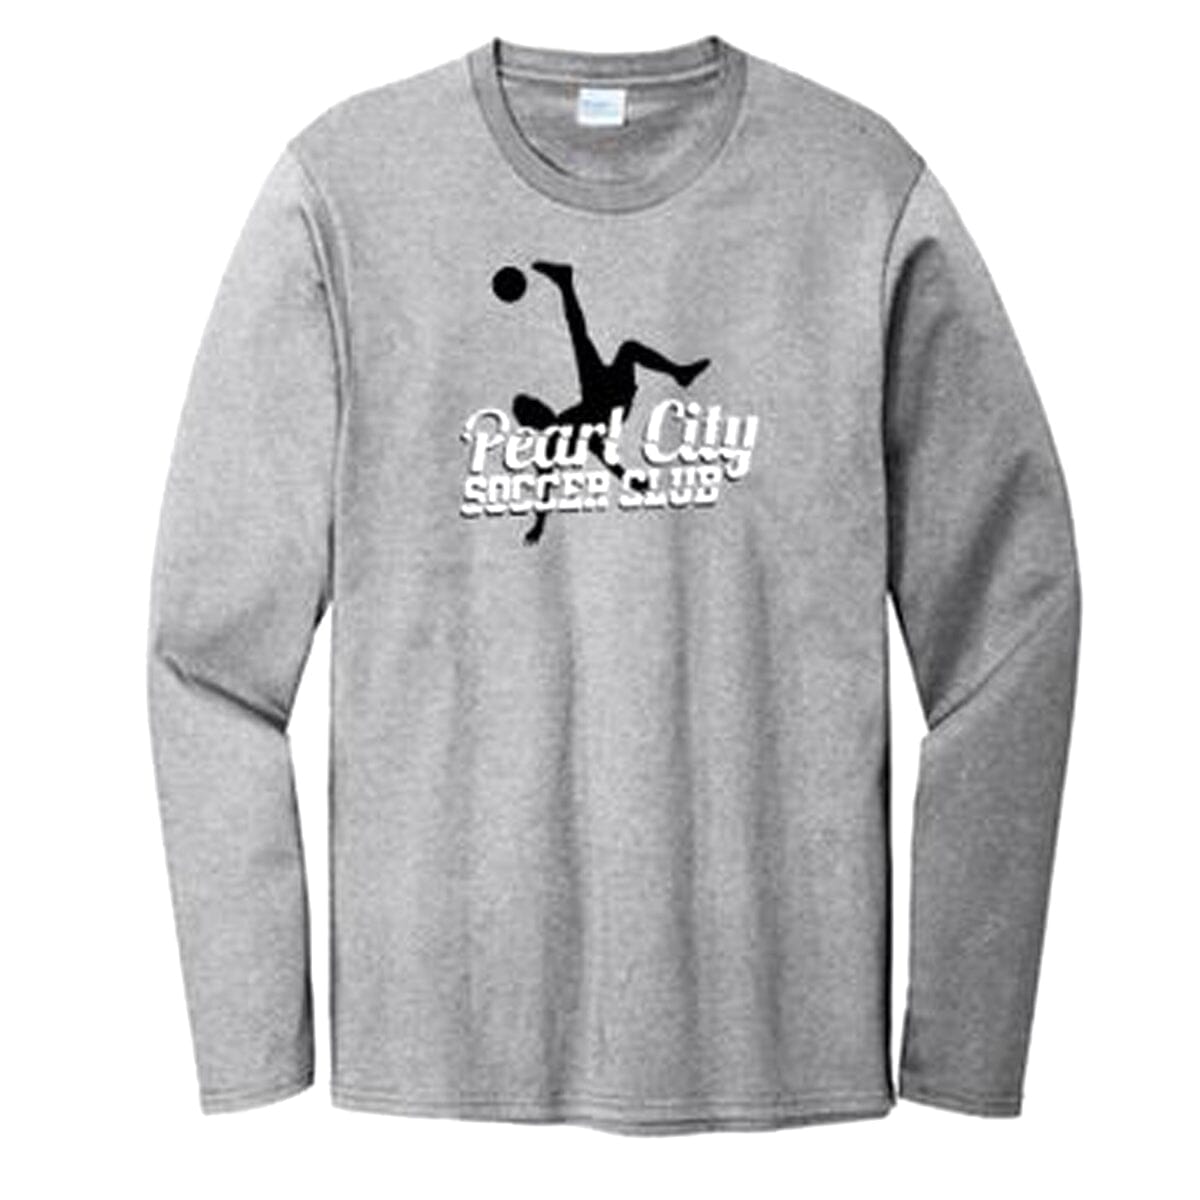 Pearl City Soccer Club Men's Perfect Weight Long Sleeve Tee Long Sleeve Goal Kick Soccer Adult X-Small Heathered Steel 